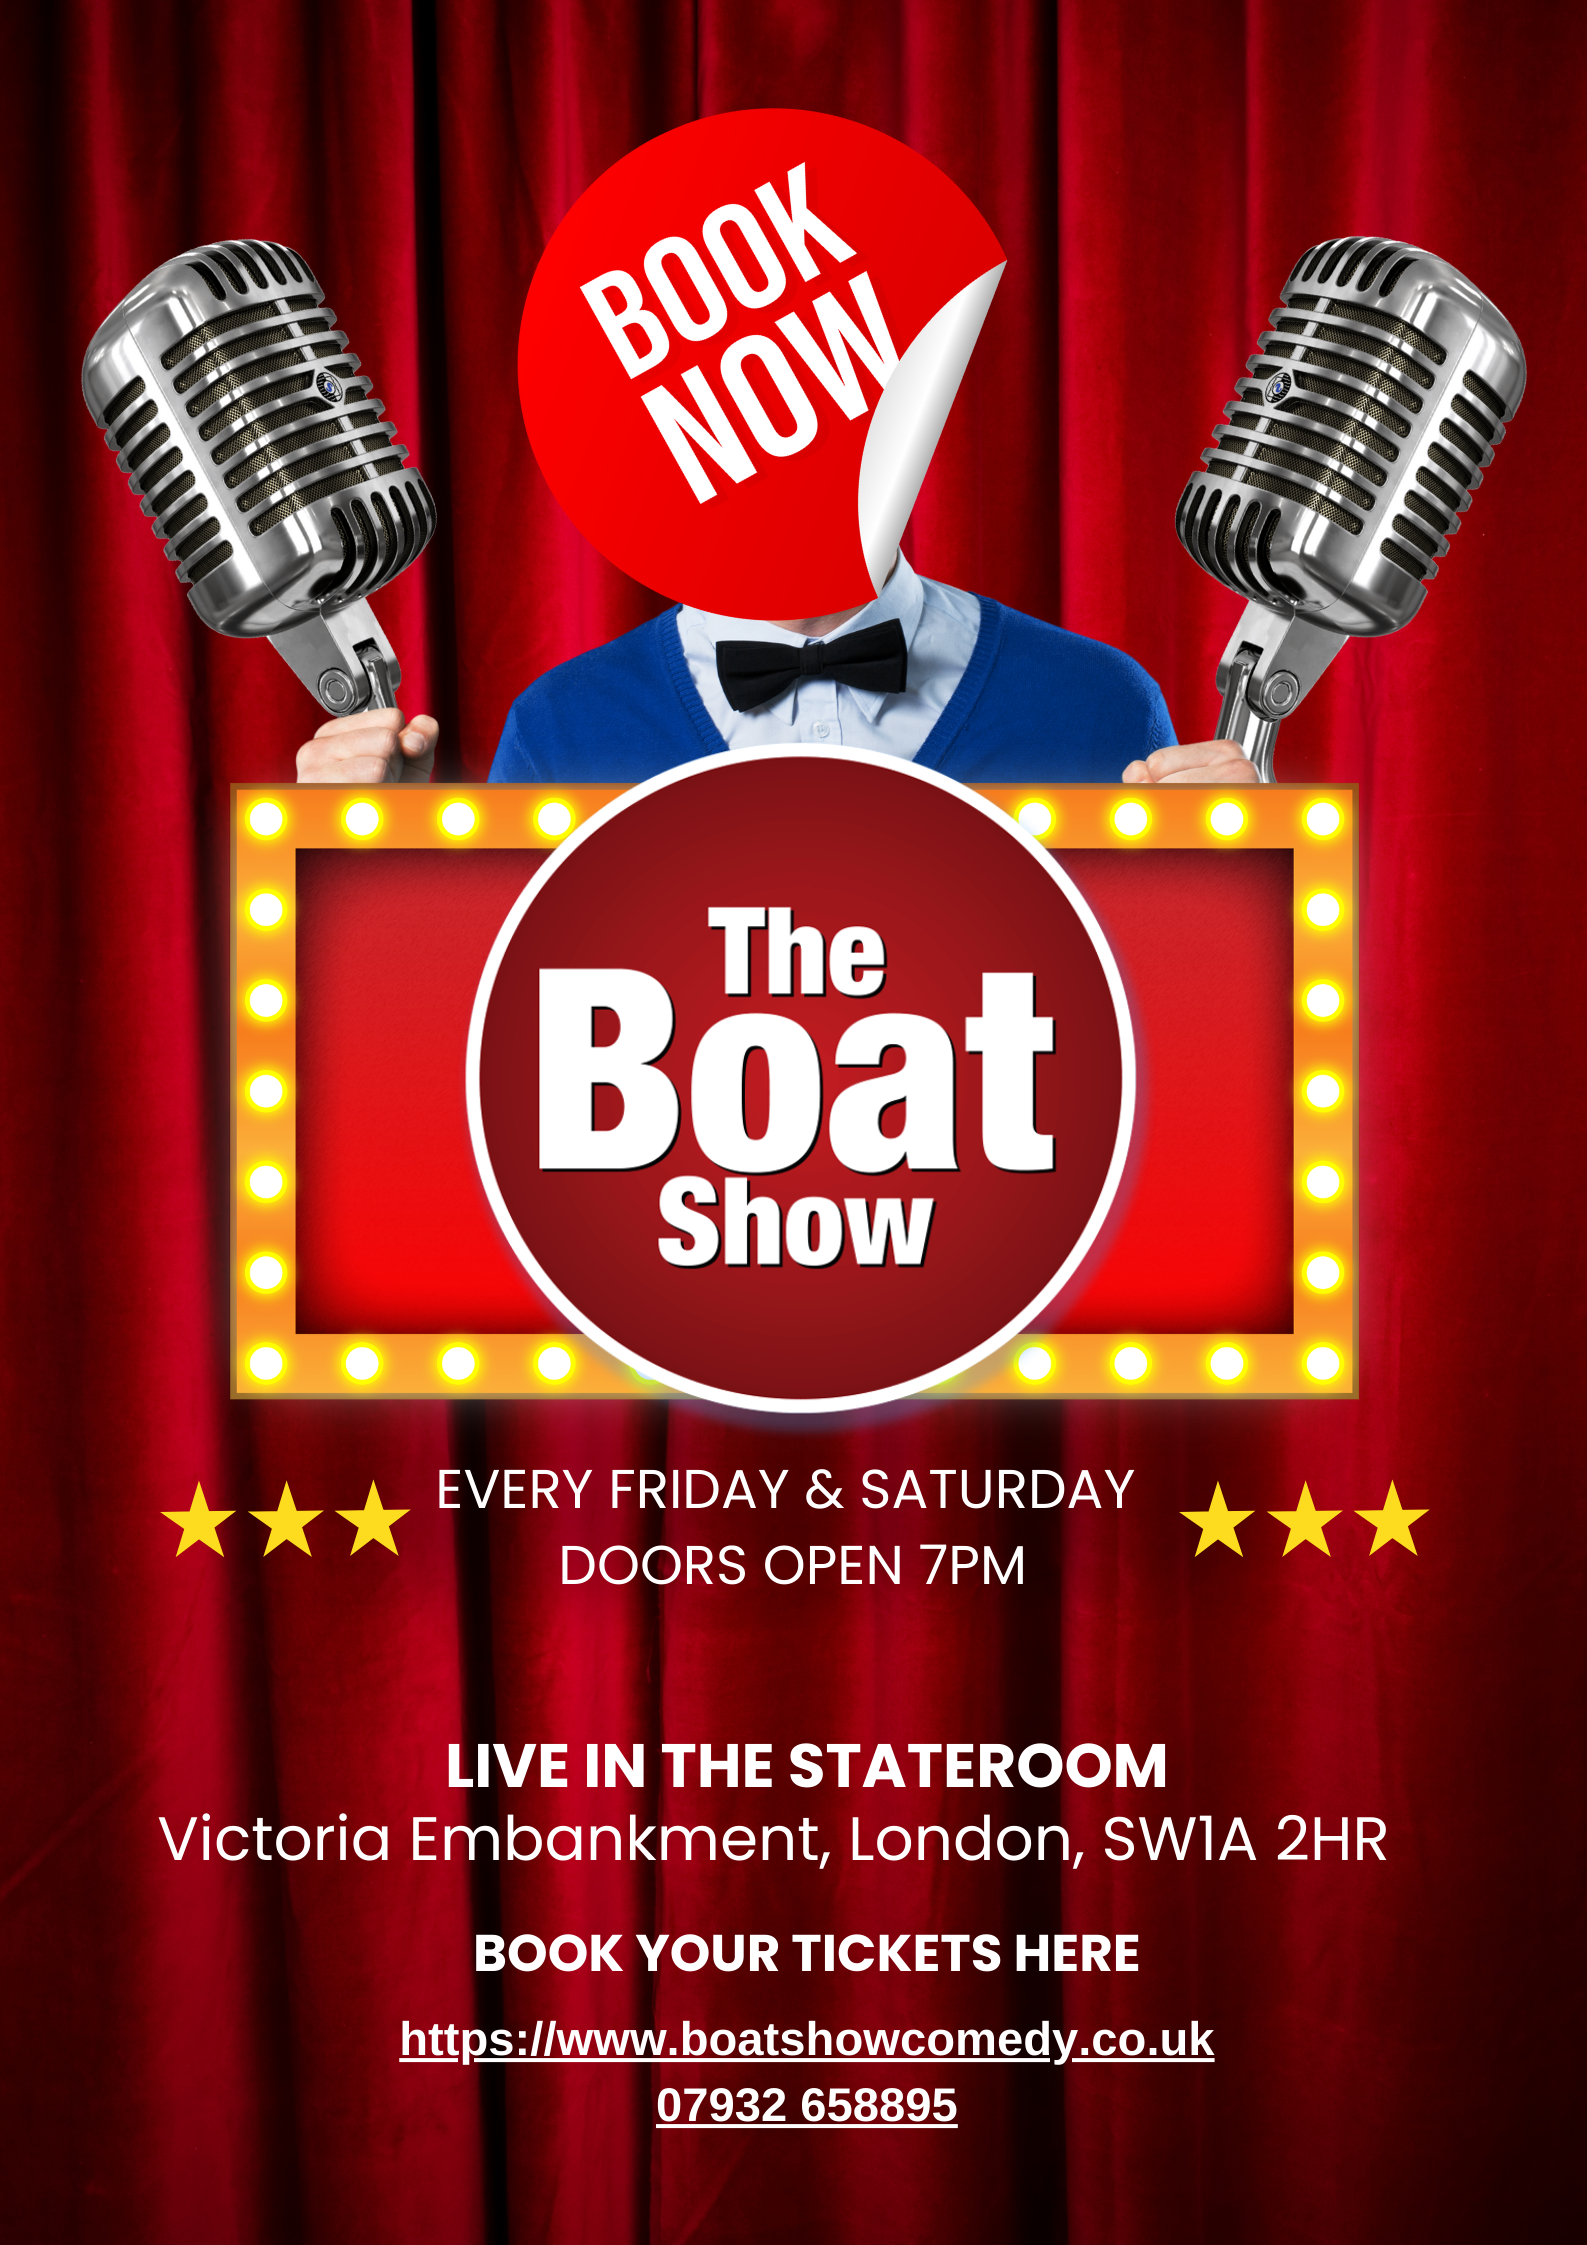 THE BOAT SHOW COMEDY SHOW EVERY FRIDAY